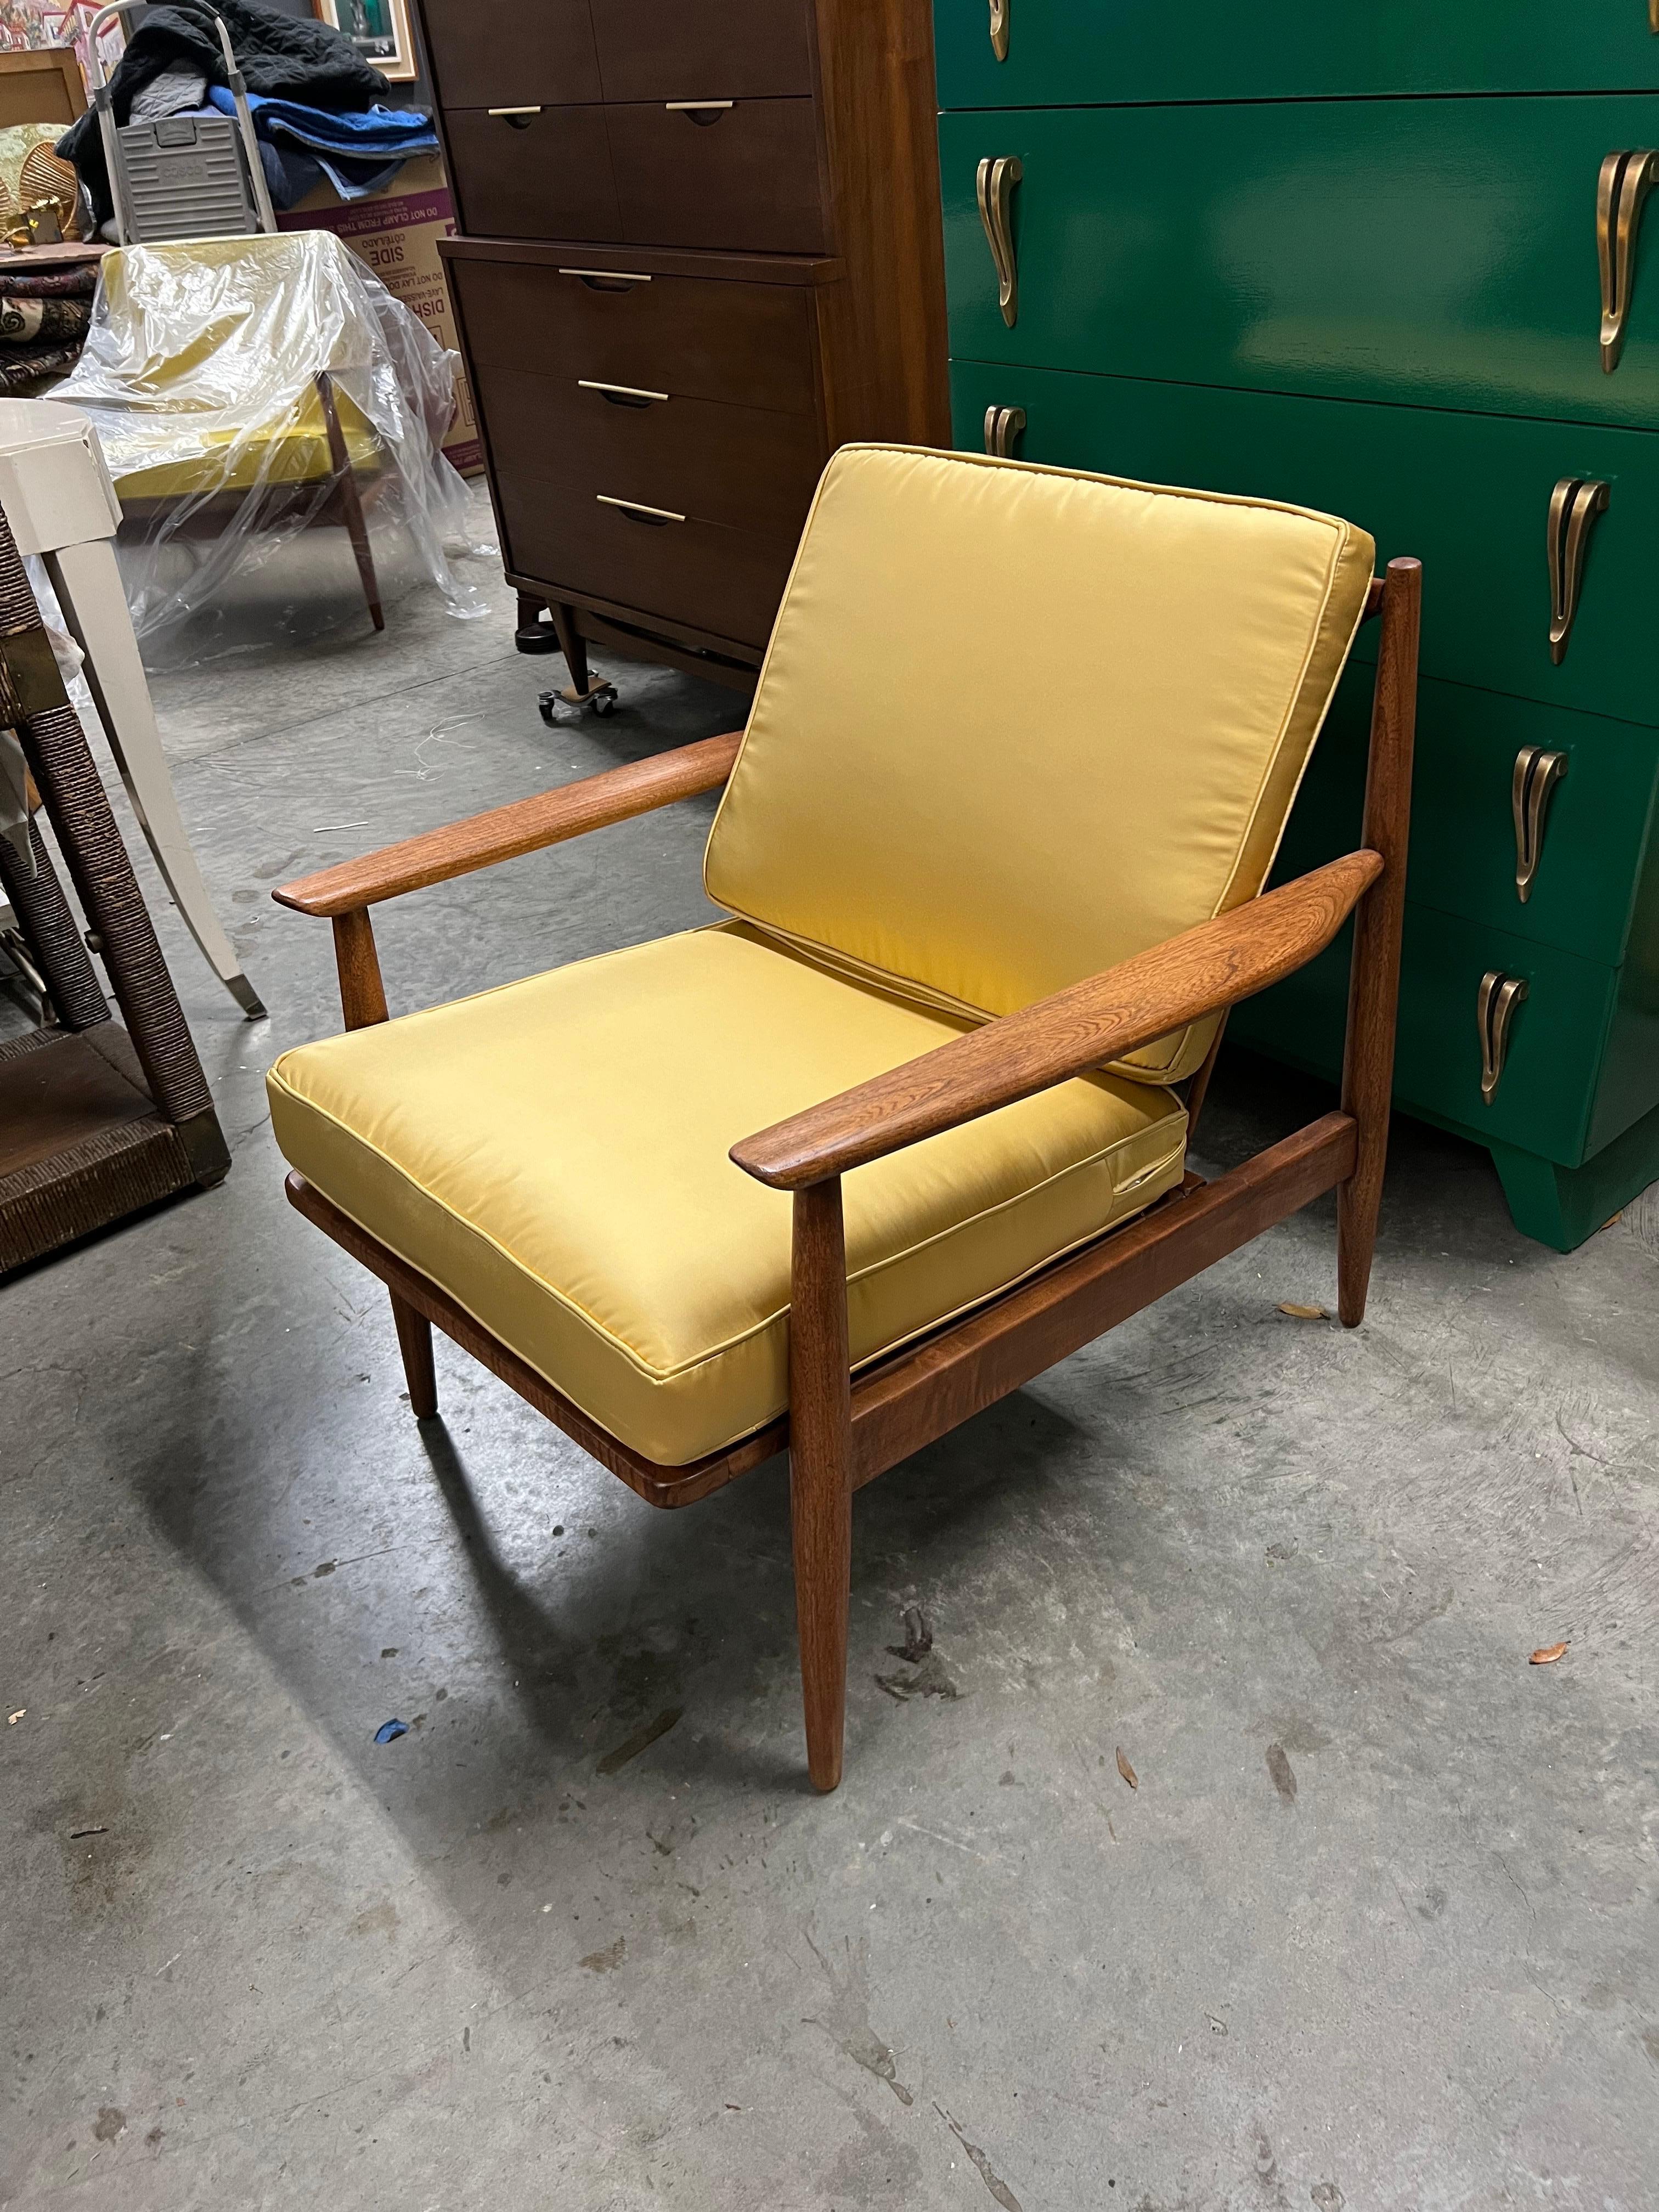 Classic mid century modern easy chair in a walnut finish that makes an incredible accent piece in the living room. Gorgeous lines with a spindle frame and sculpted arms give a delicate touch that belie its surprising robustness.

After much hemming